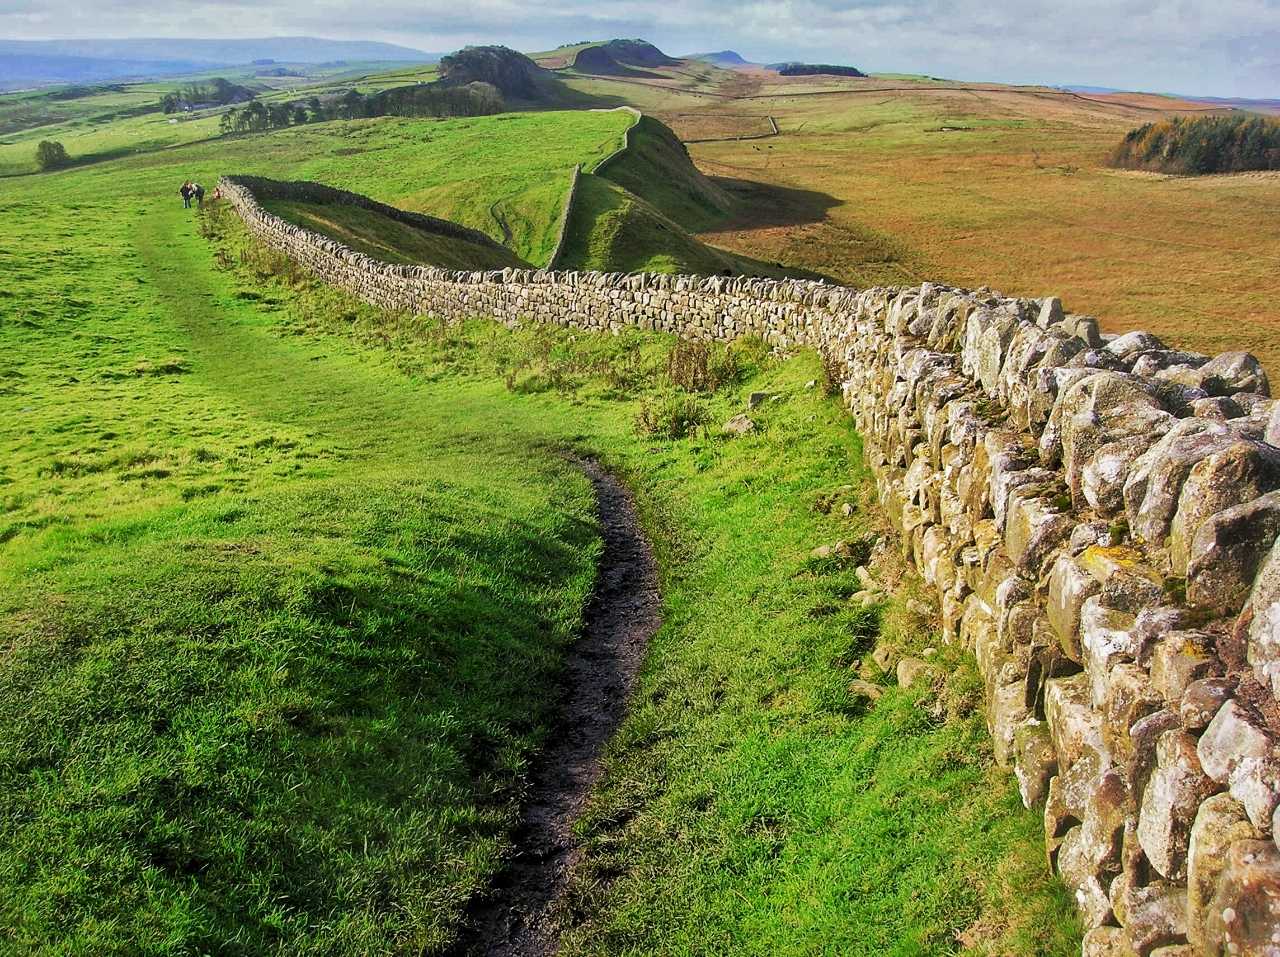 Archaeology project uncovers Roman engraved gems near Hadrian's Wall 3